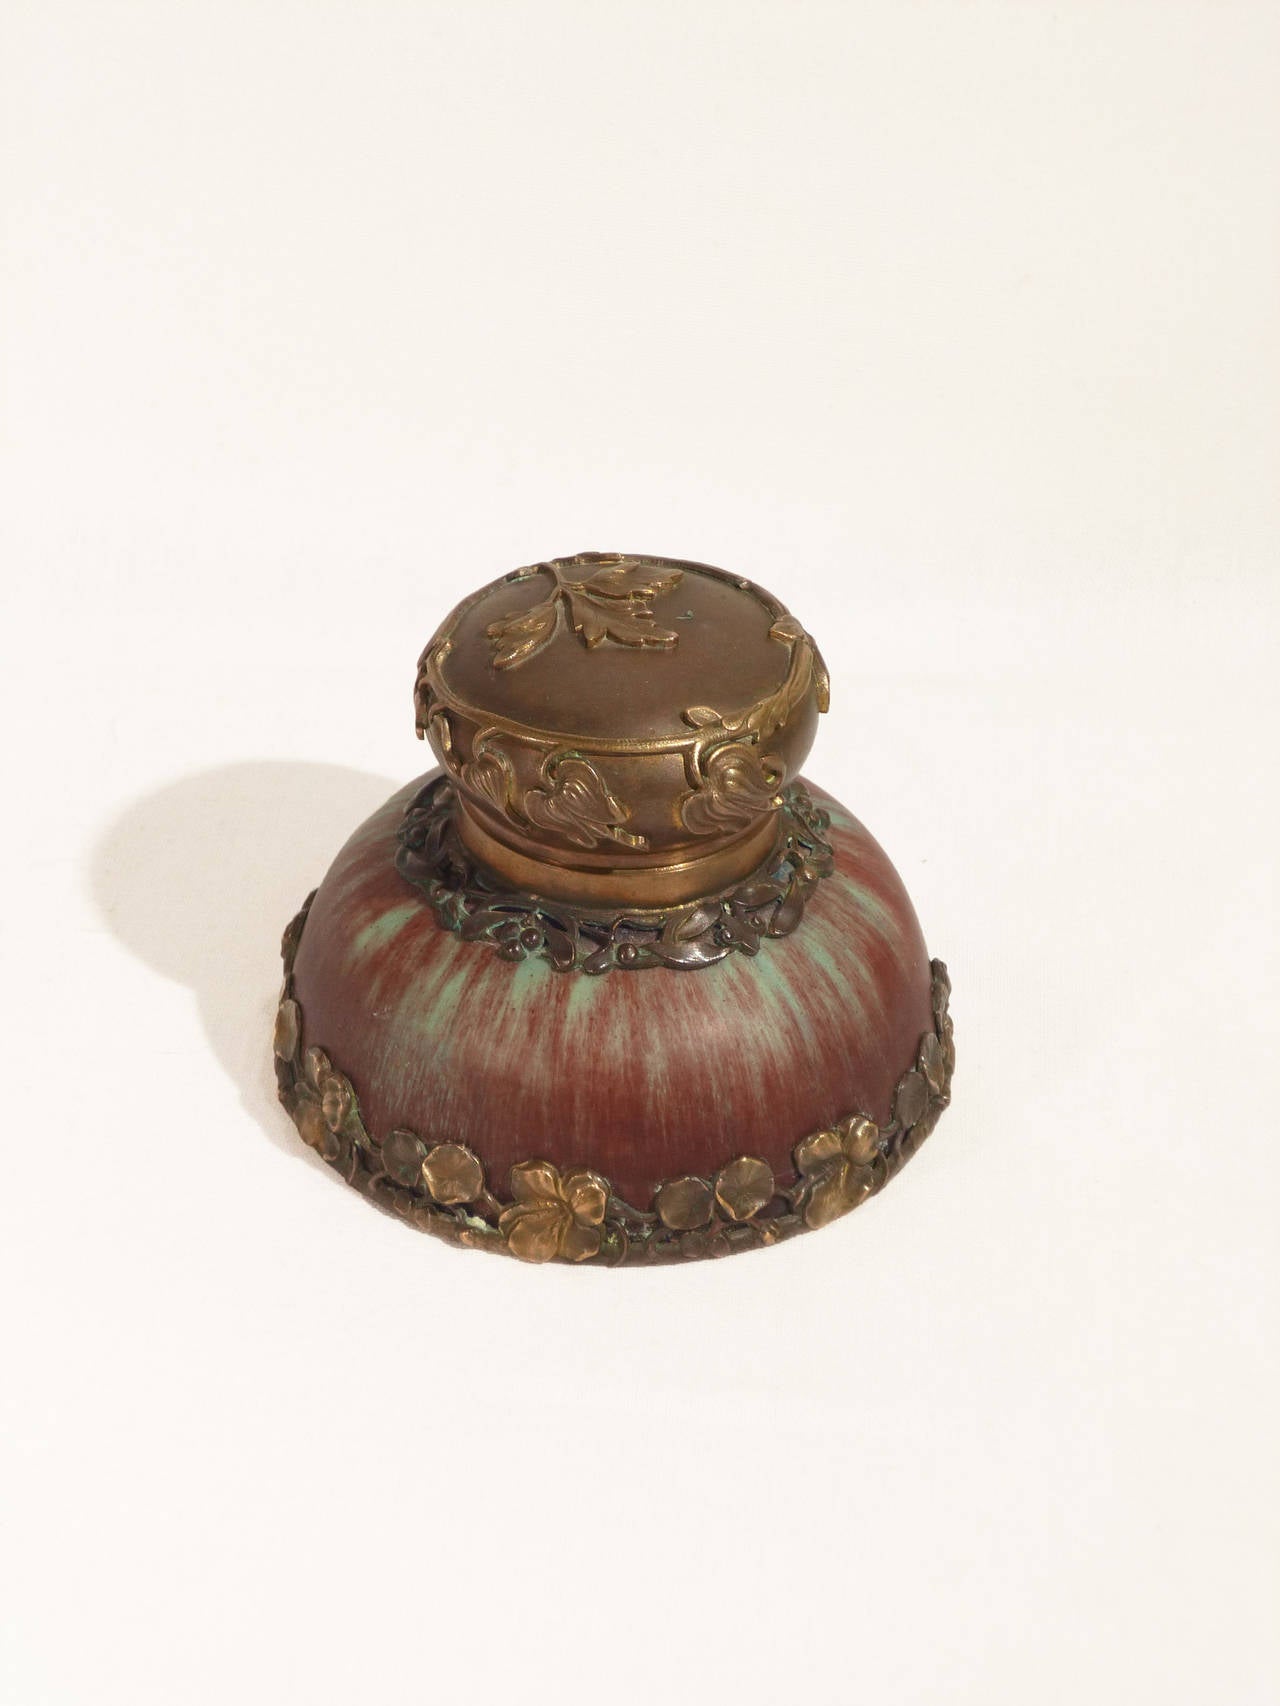 Eugene Baudin
An Art Nouveau Ceramic Inkwell
Bronze mount decorated with flowers
Signed